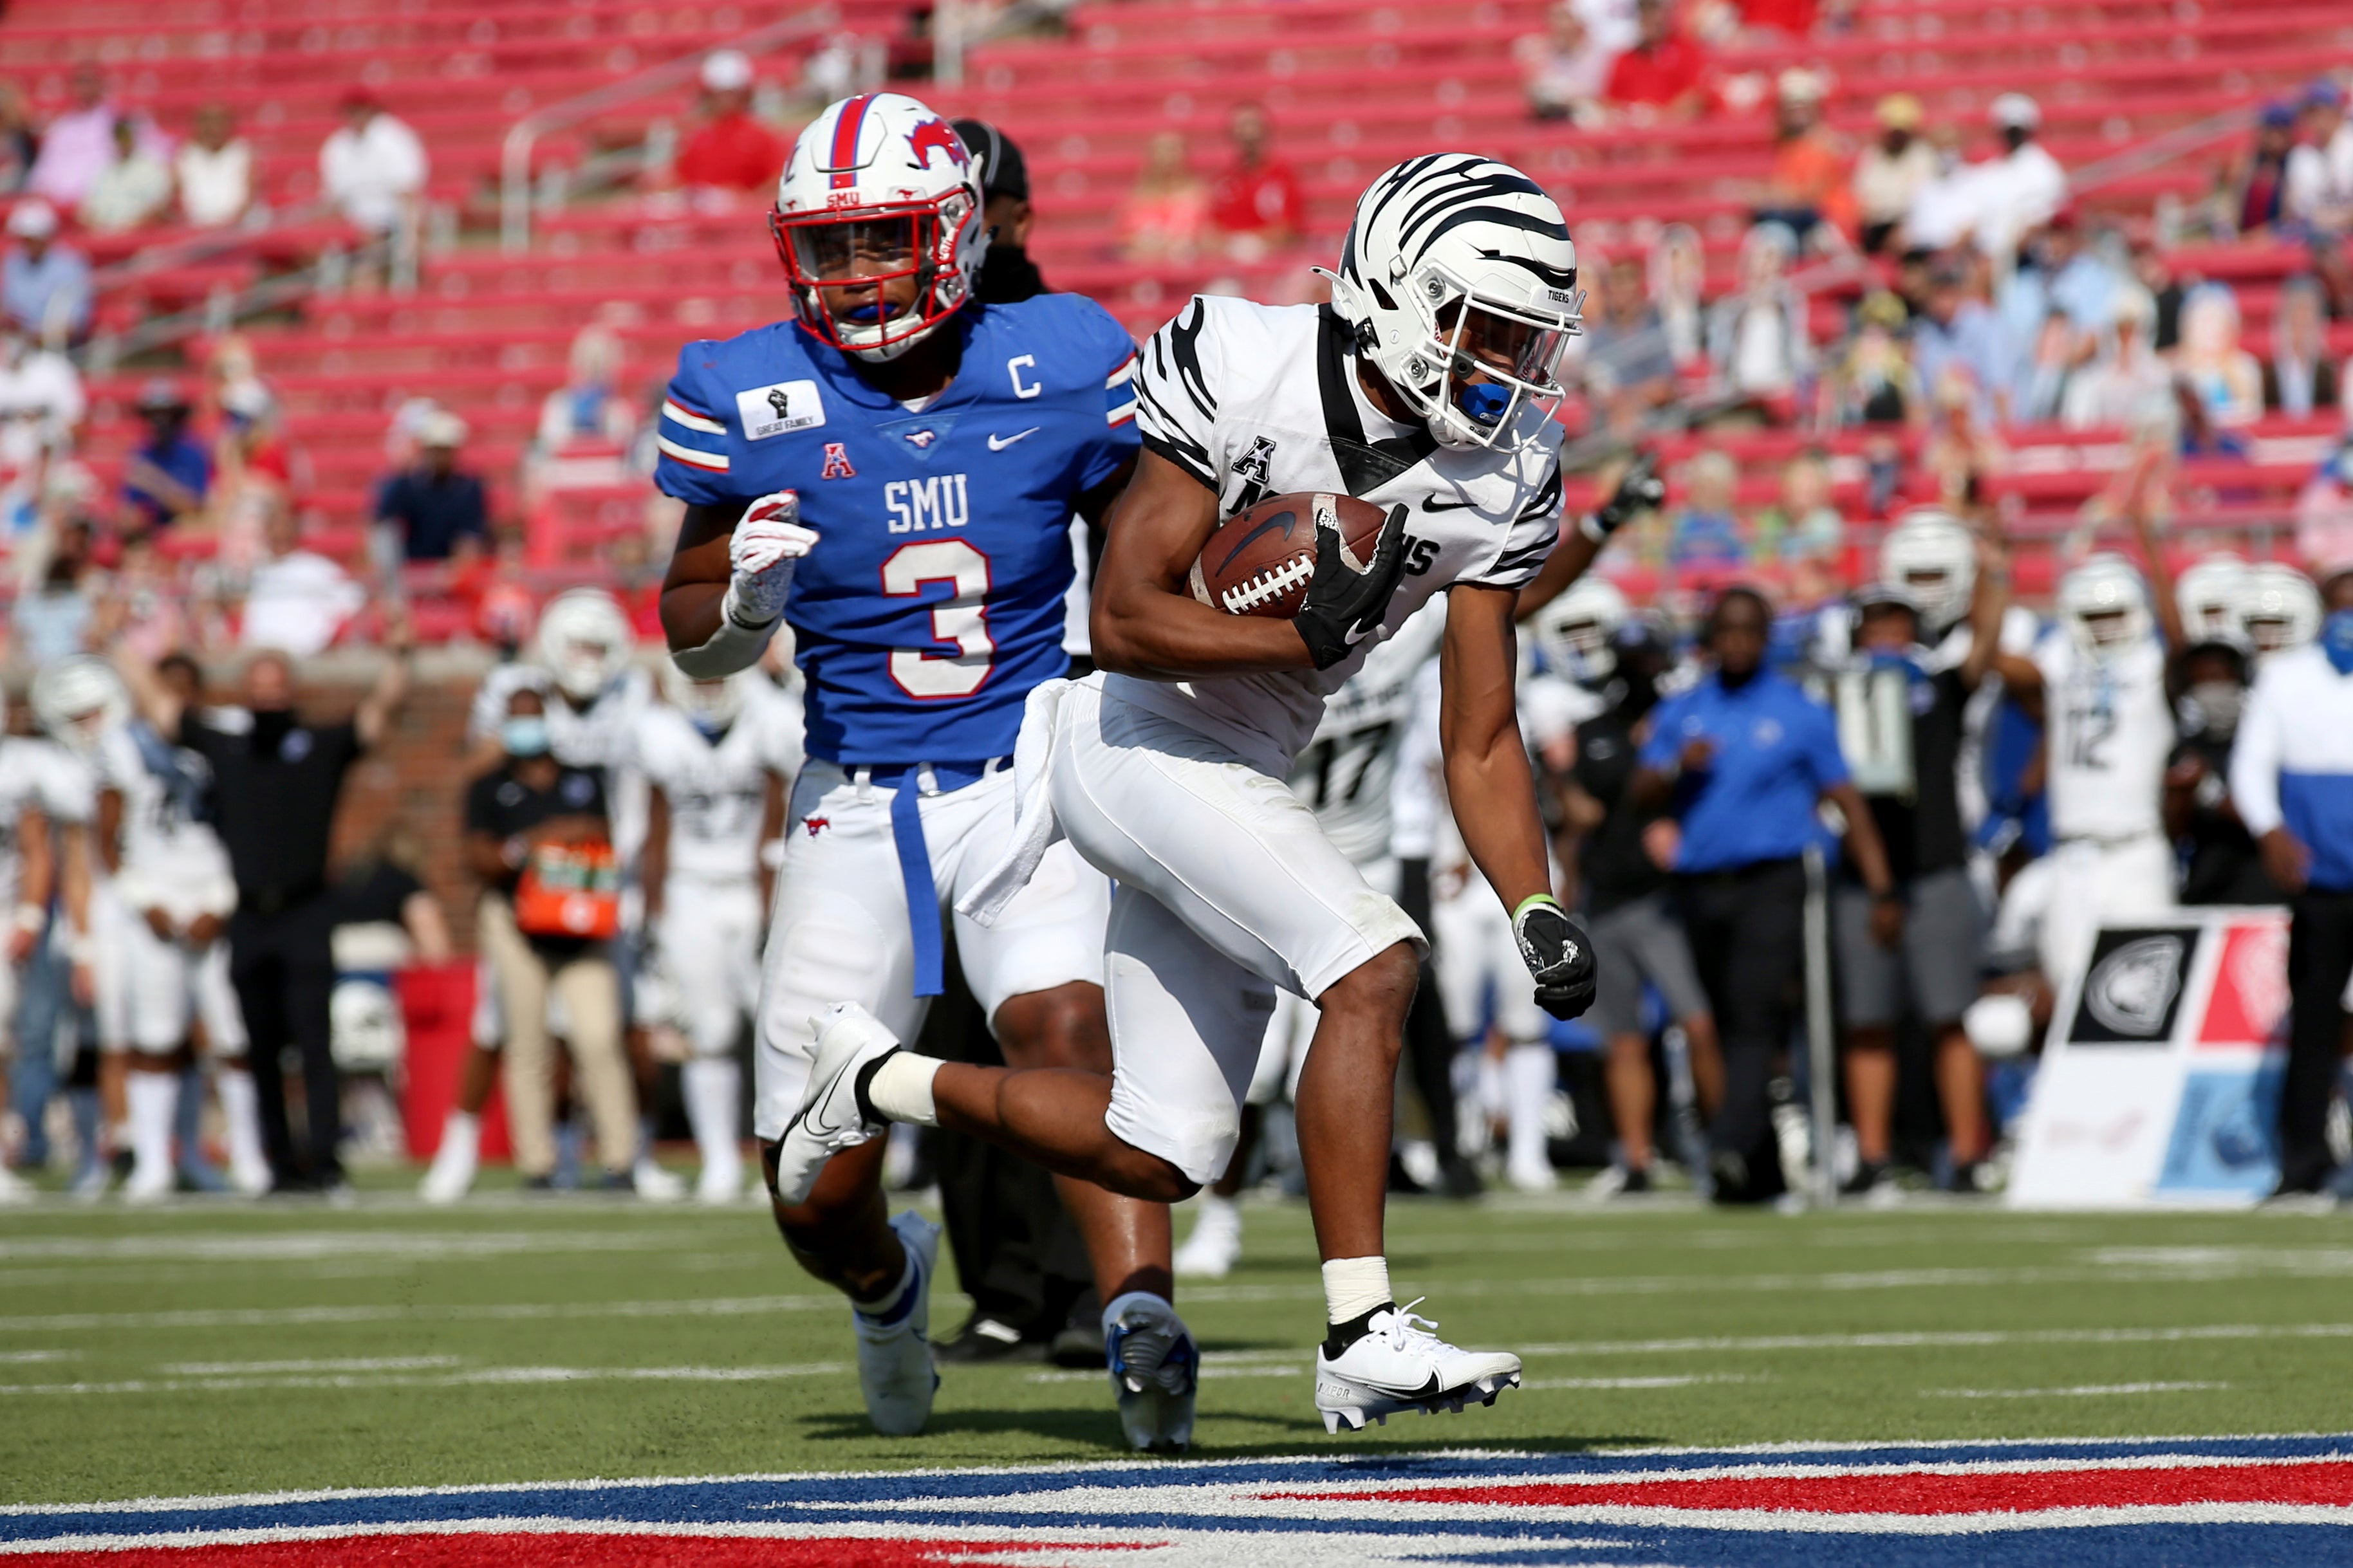 SMU gets late FG for 3027 win over longidle No. 25 Memphis team AP